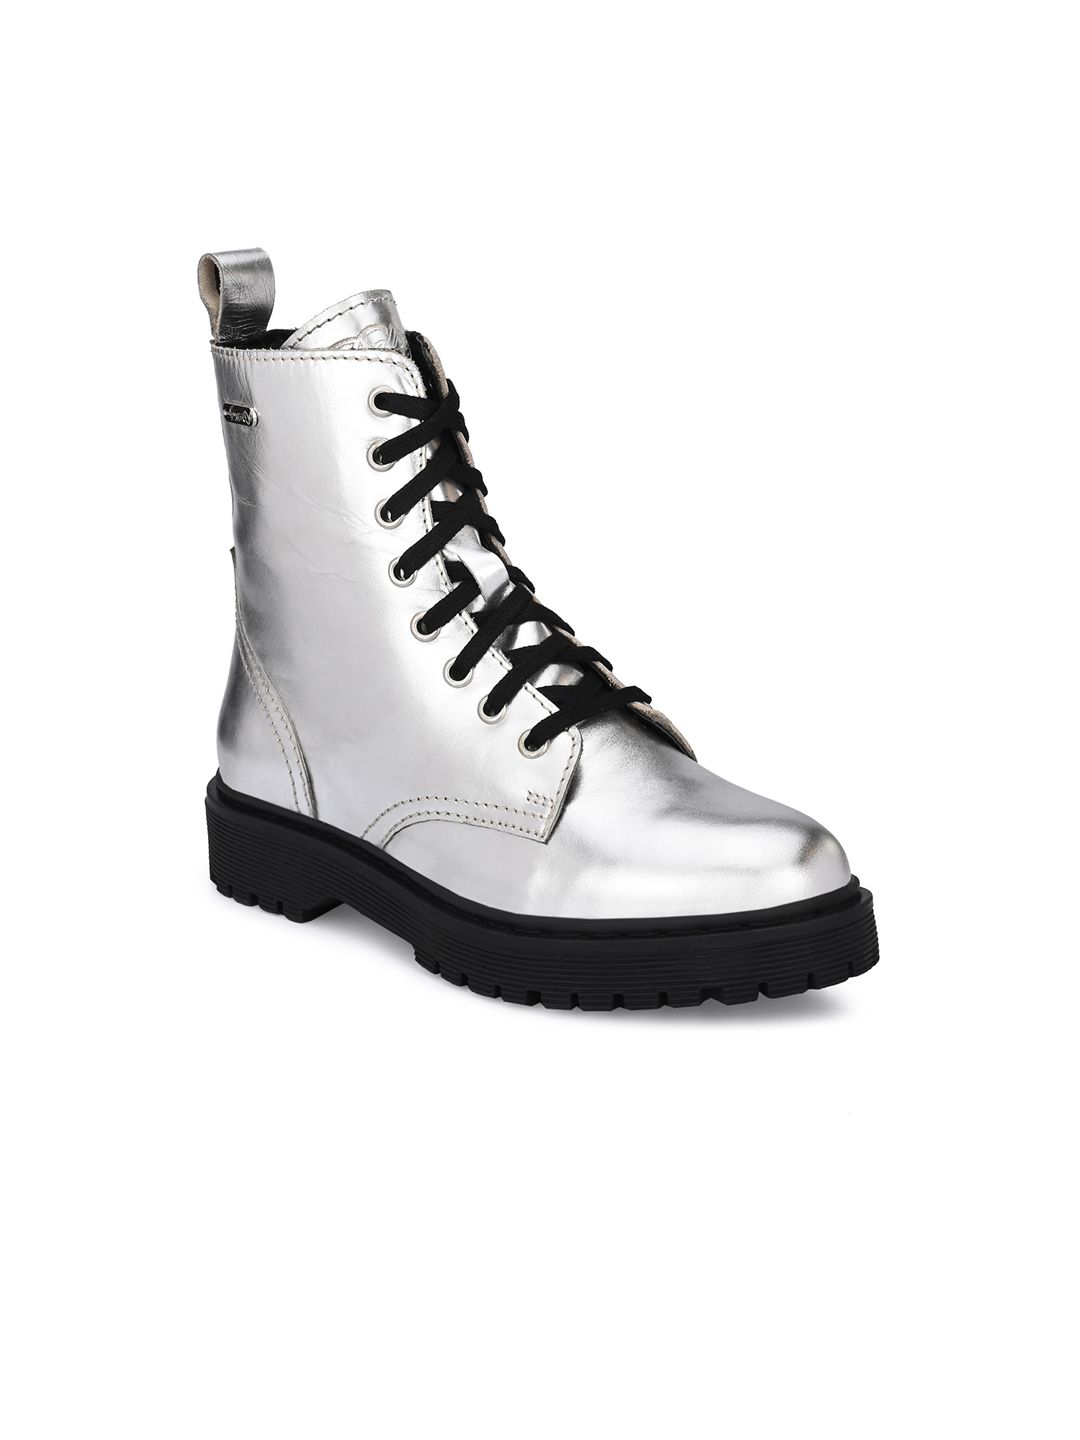 Delize Silver-Toned Leather Wedge Heeled Boots Price in India